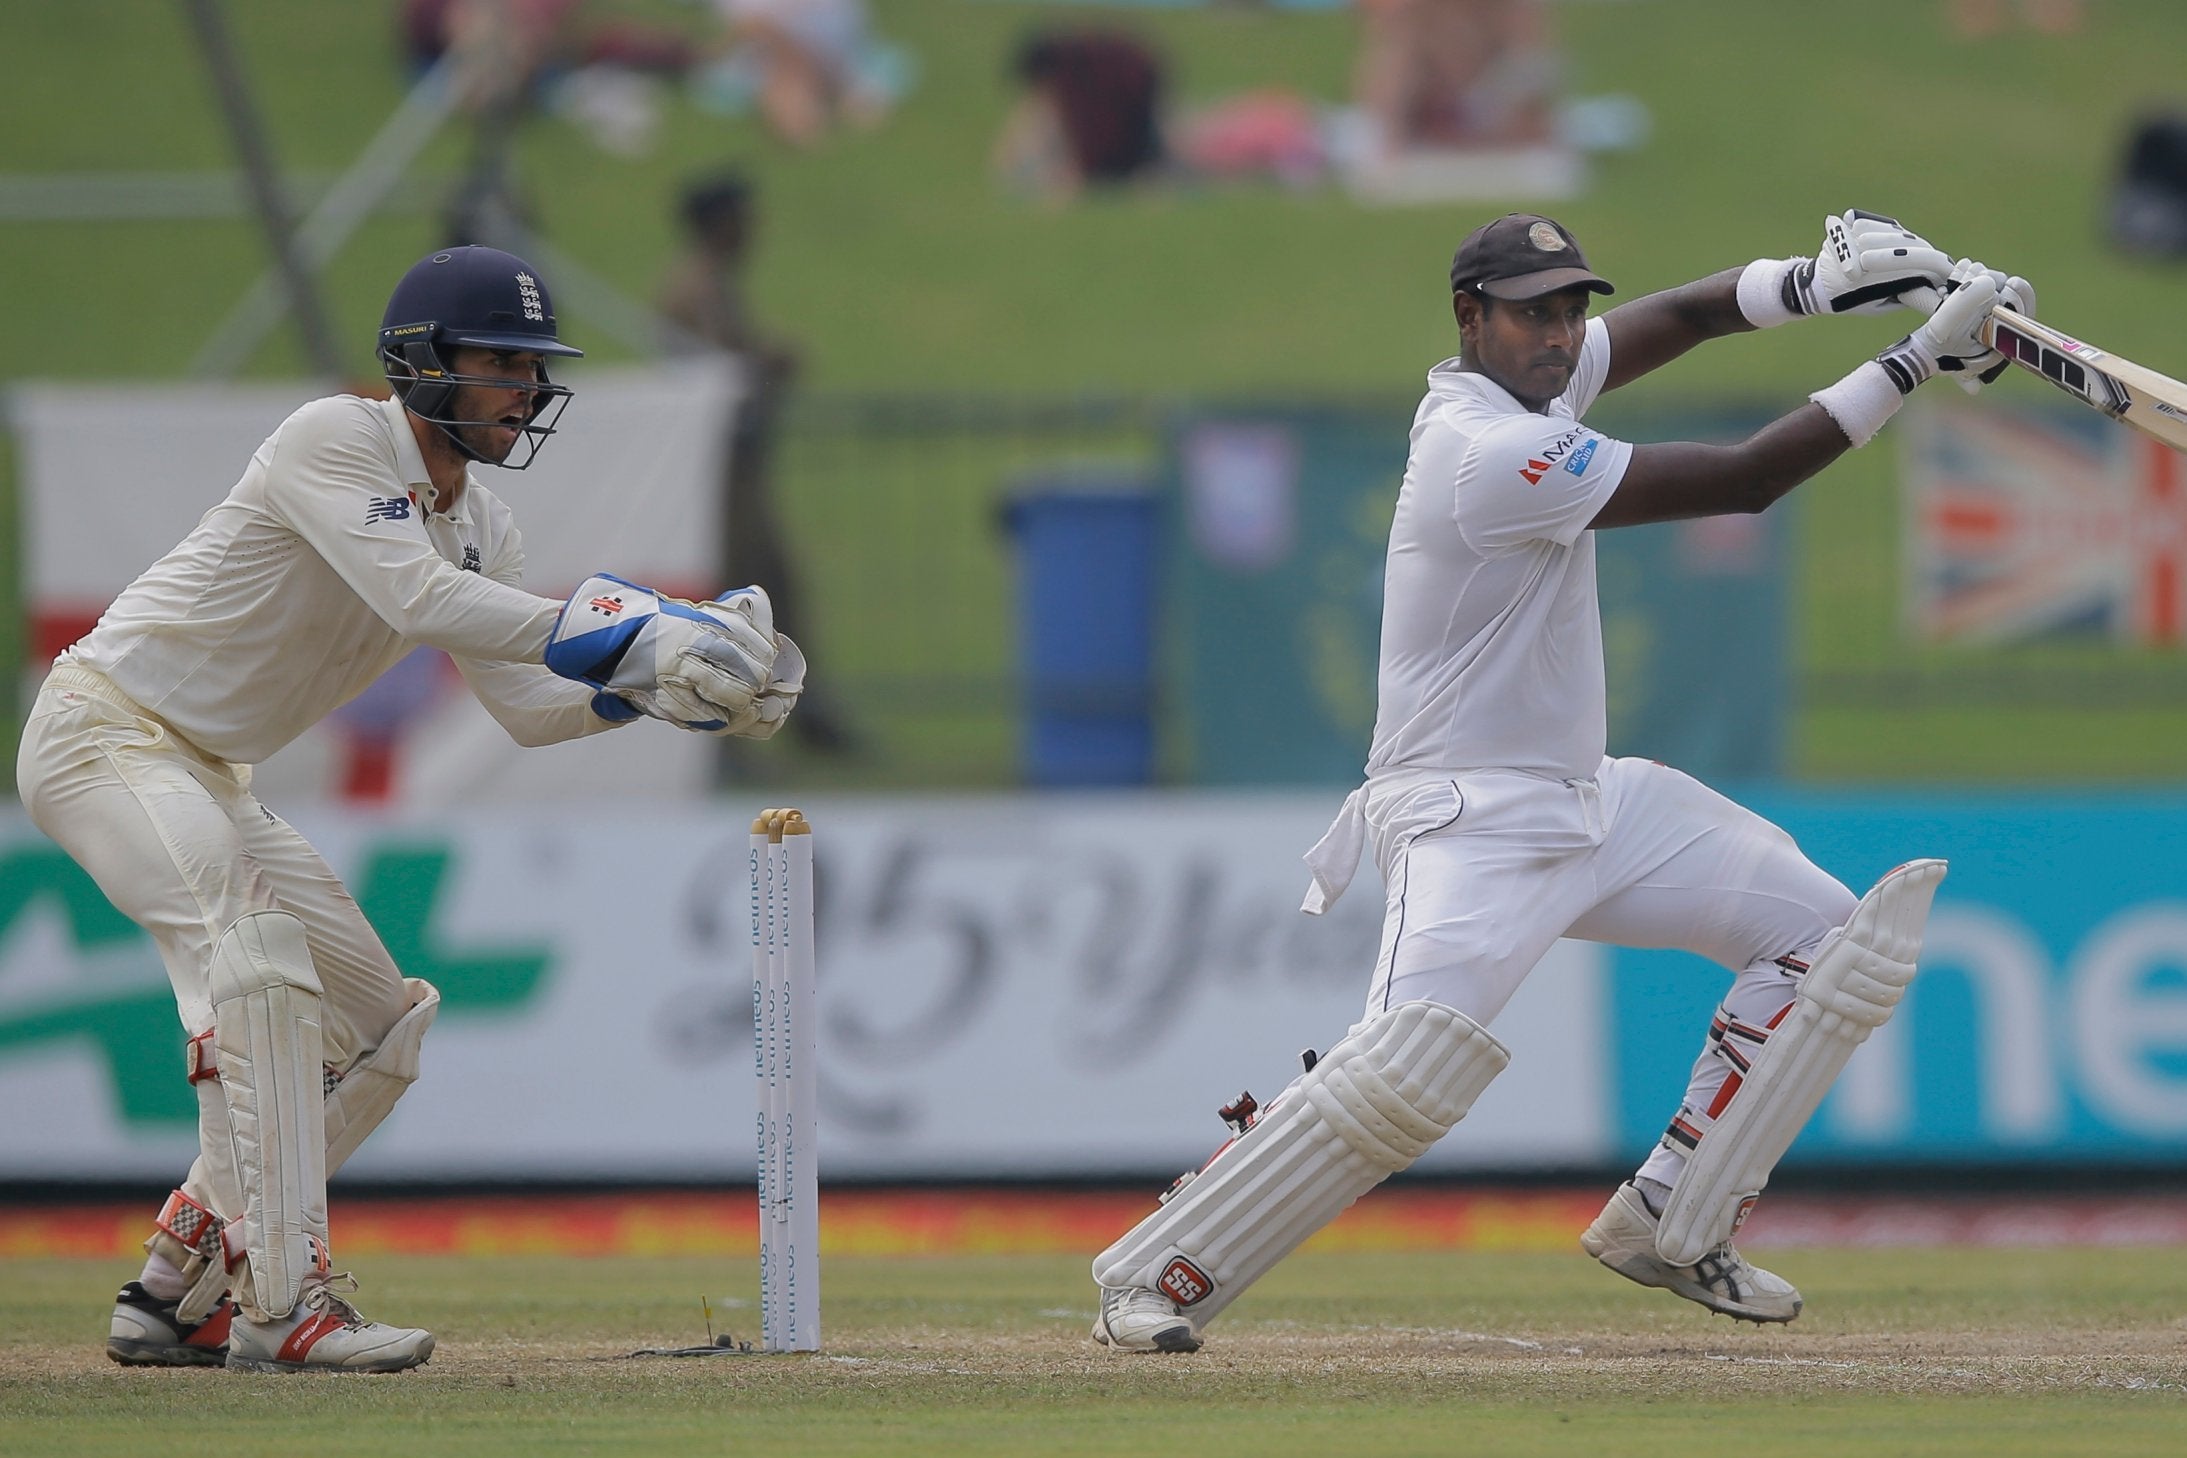 Angelo Mathews’ 88 in Kandy wasn’t enough to save the hosts’ series